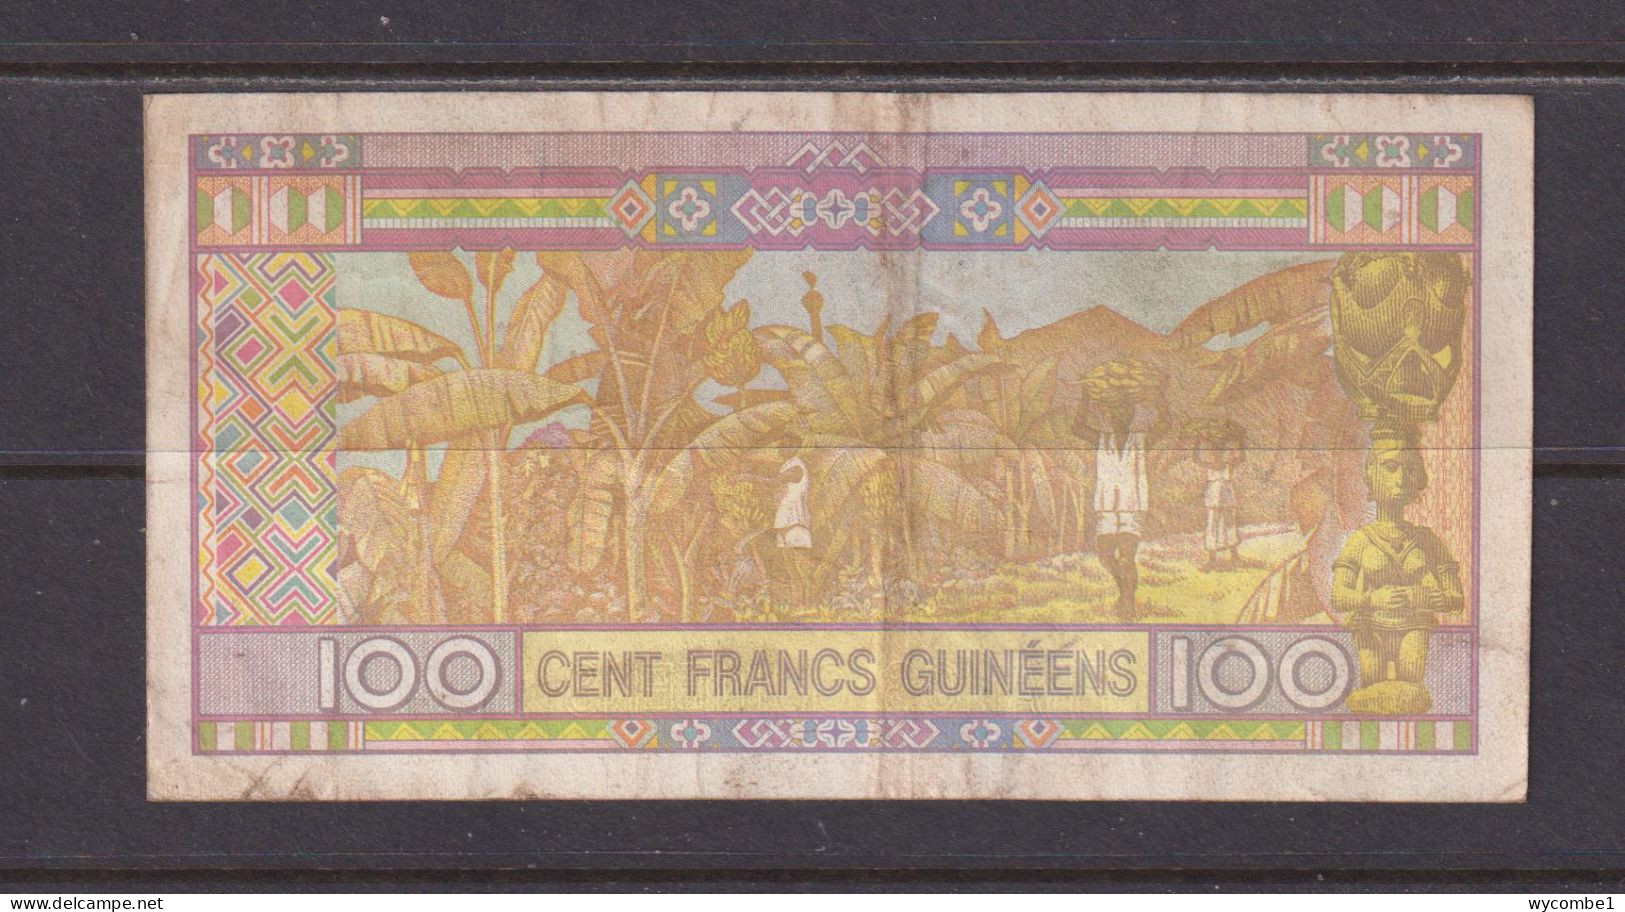 GUINEA - 2015 100 Francs Circulated Banknote As Scans - Guinea